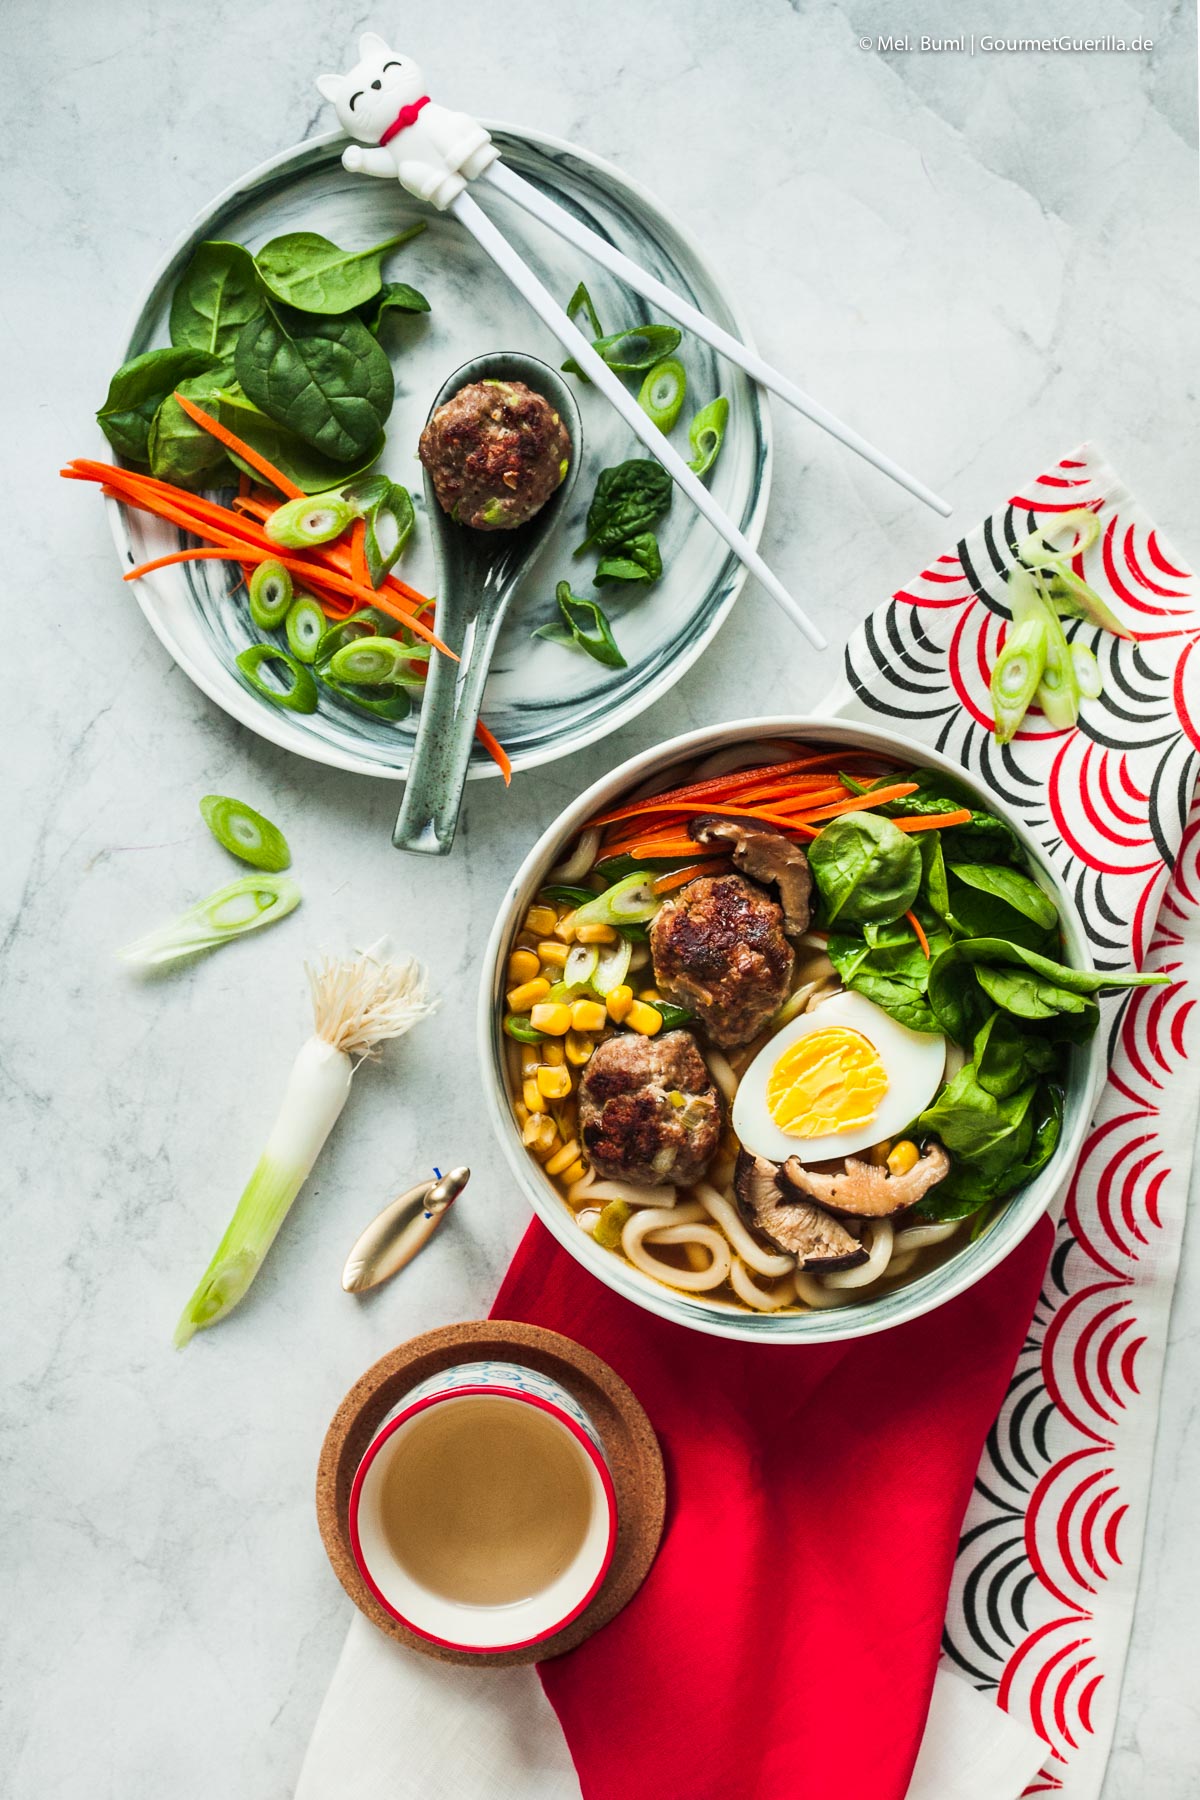 Fast Japanese Ramen with Meatballs, a happy-go-lucky noodle soup for the end of the day | GourmetGuerilla. DE 